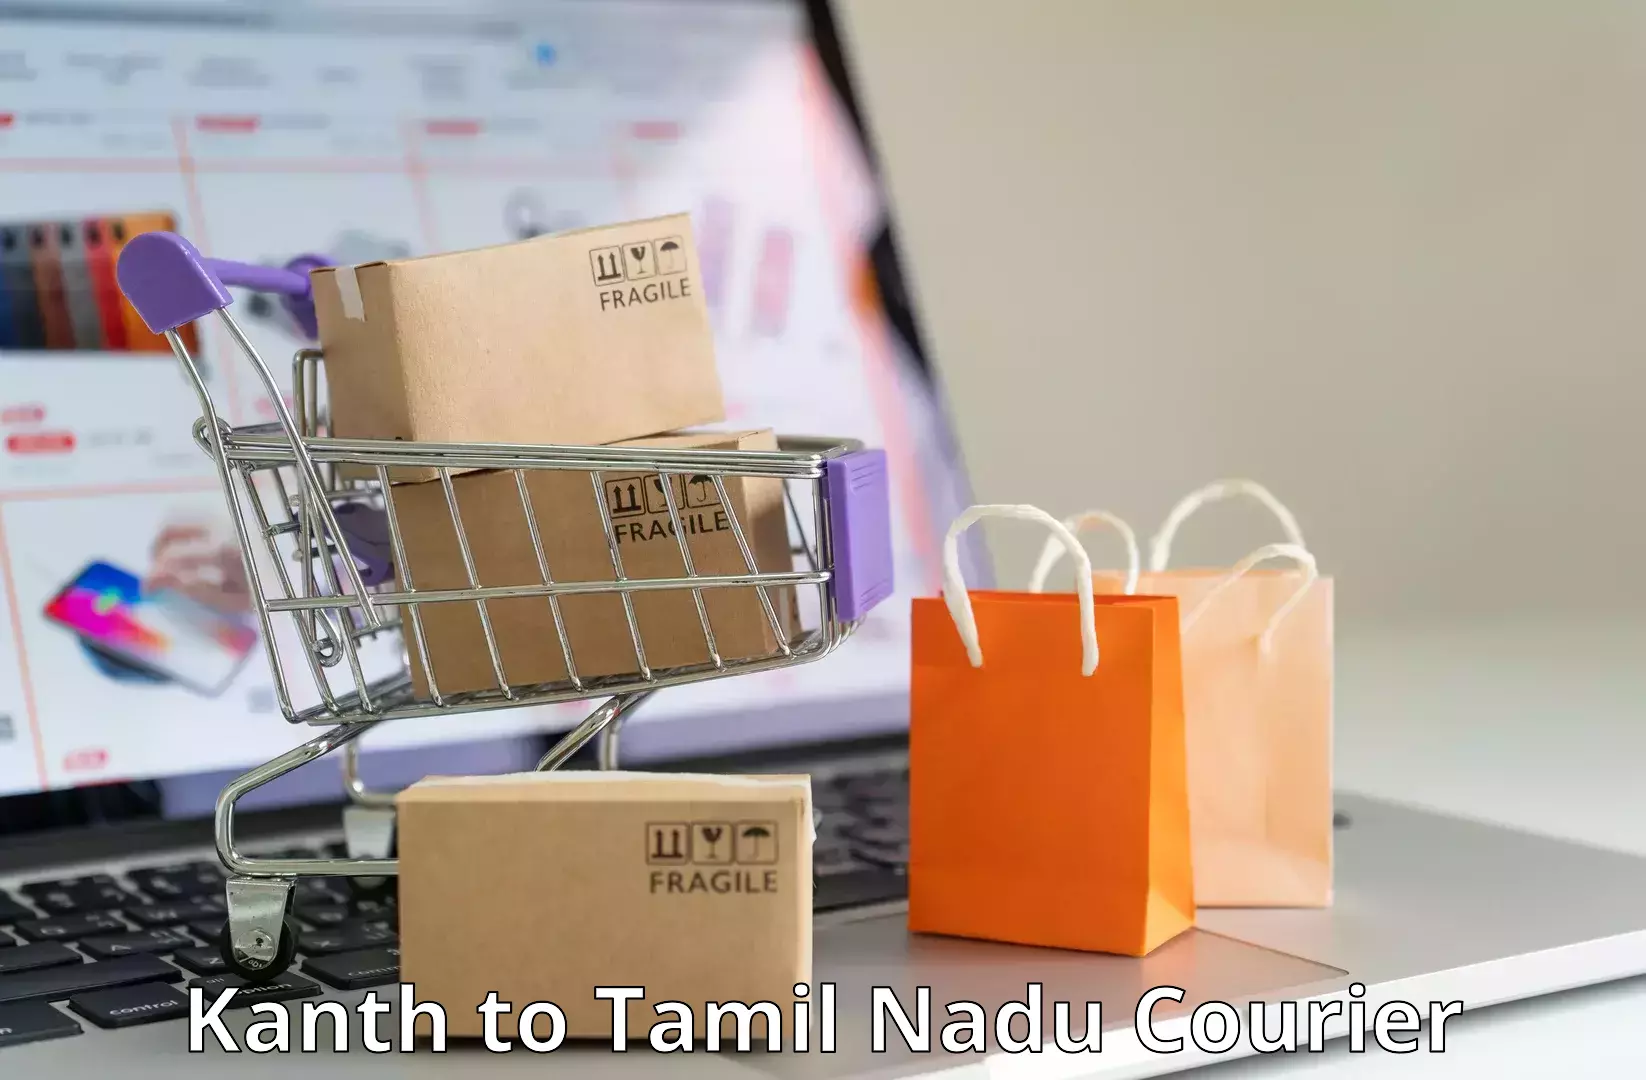 Small parcel delivery in Kanth to Gobichettipalayam